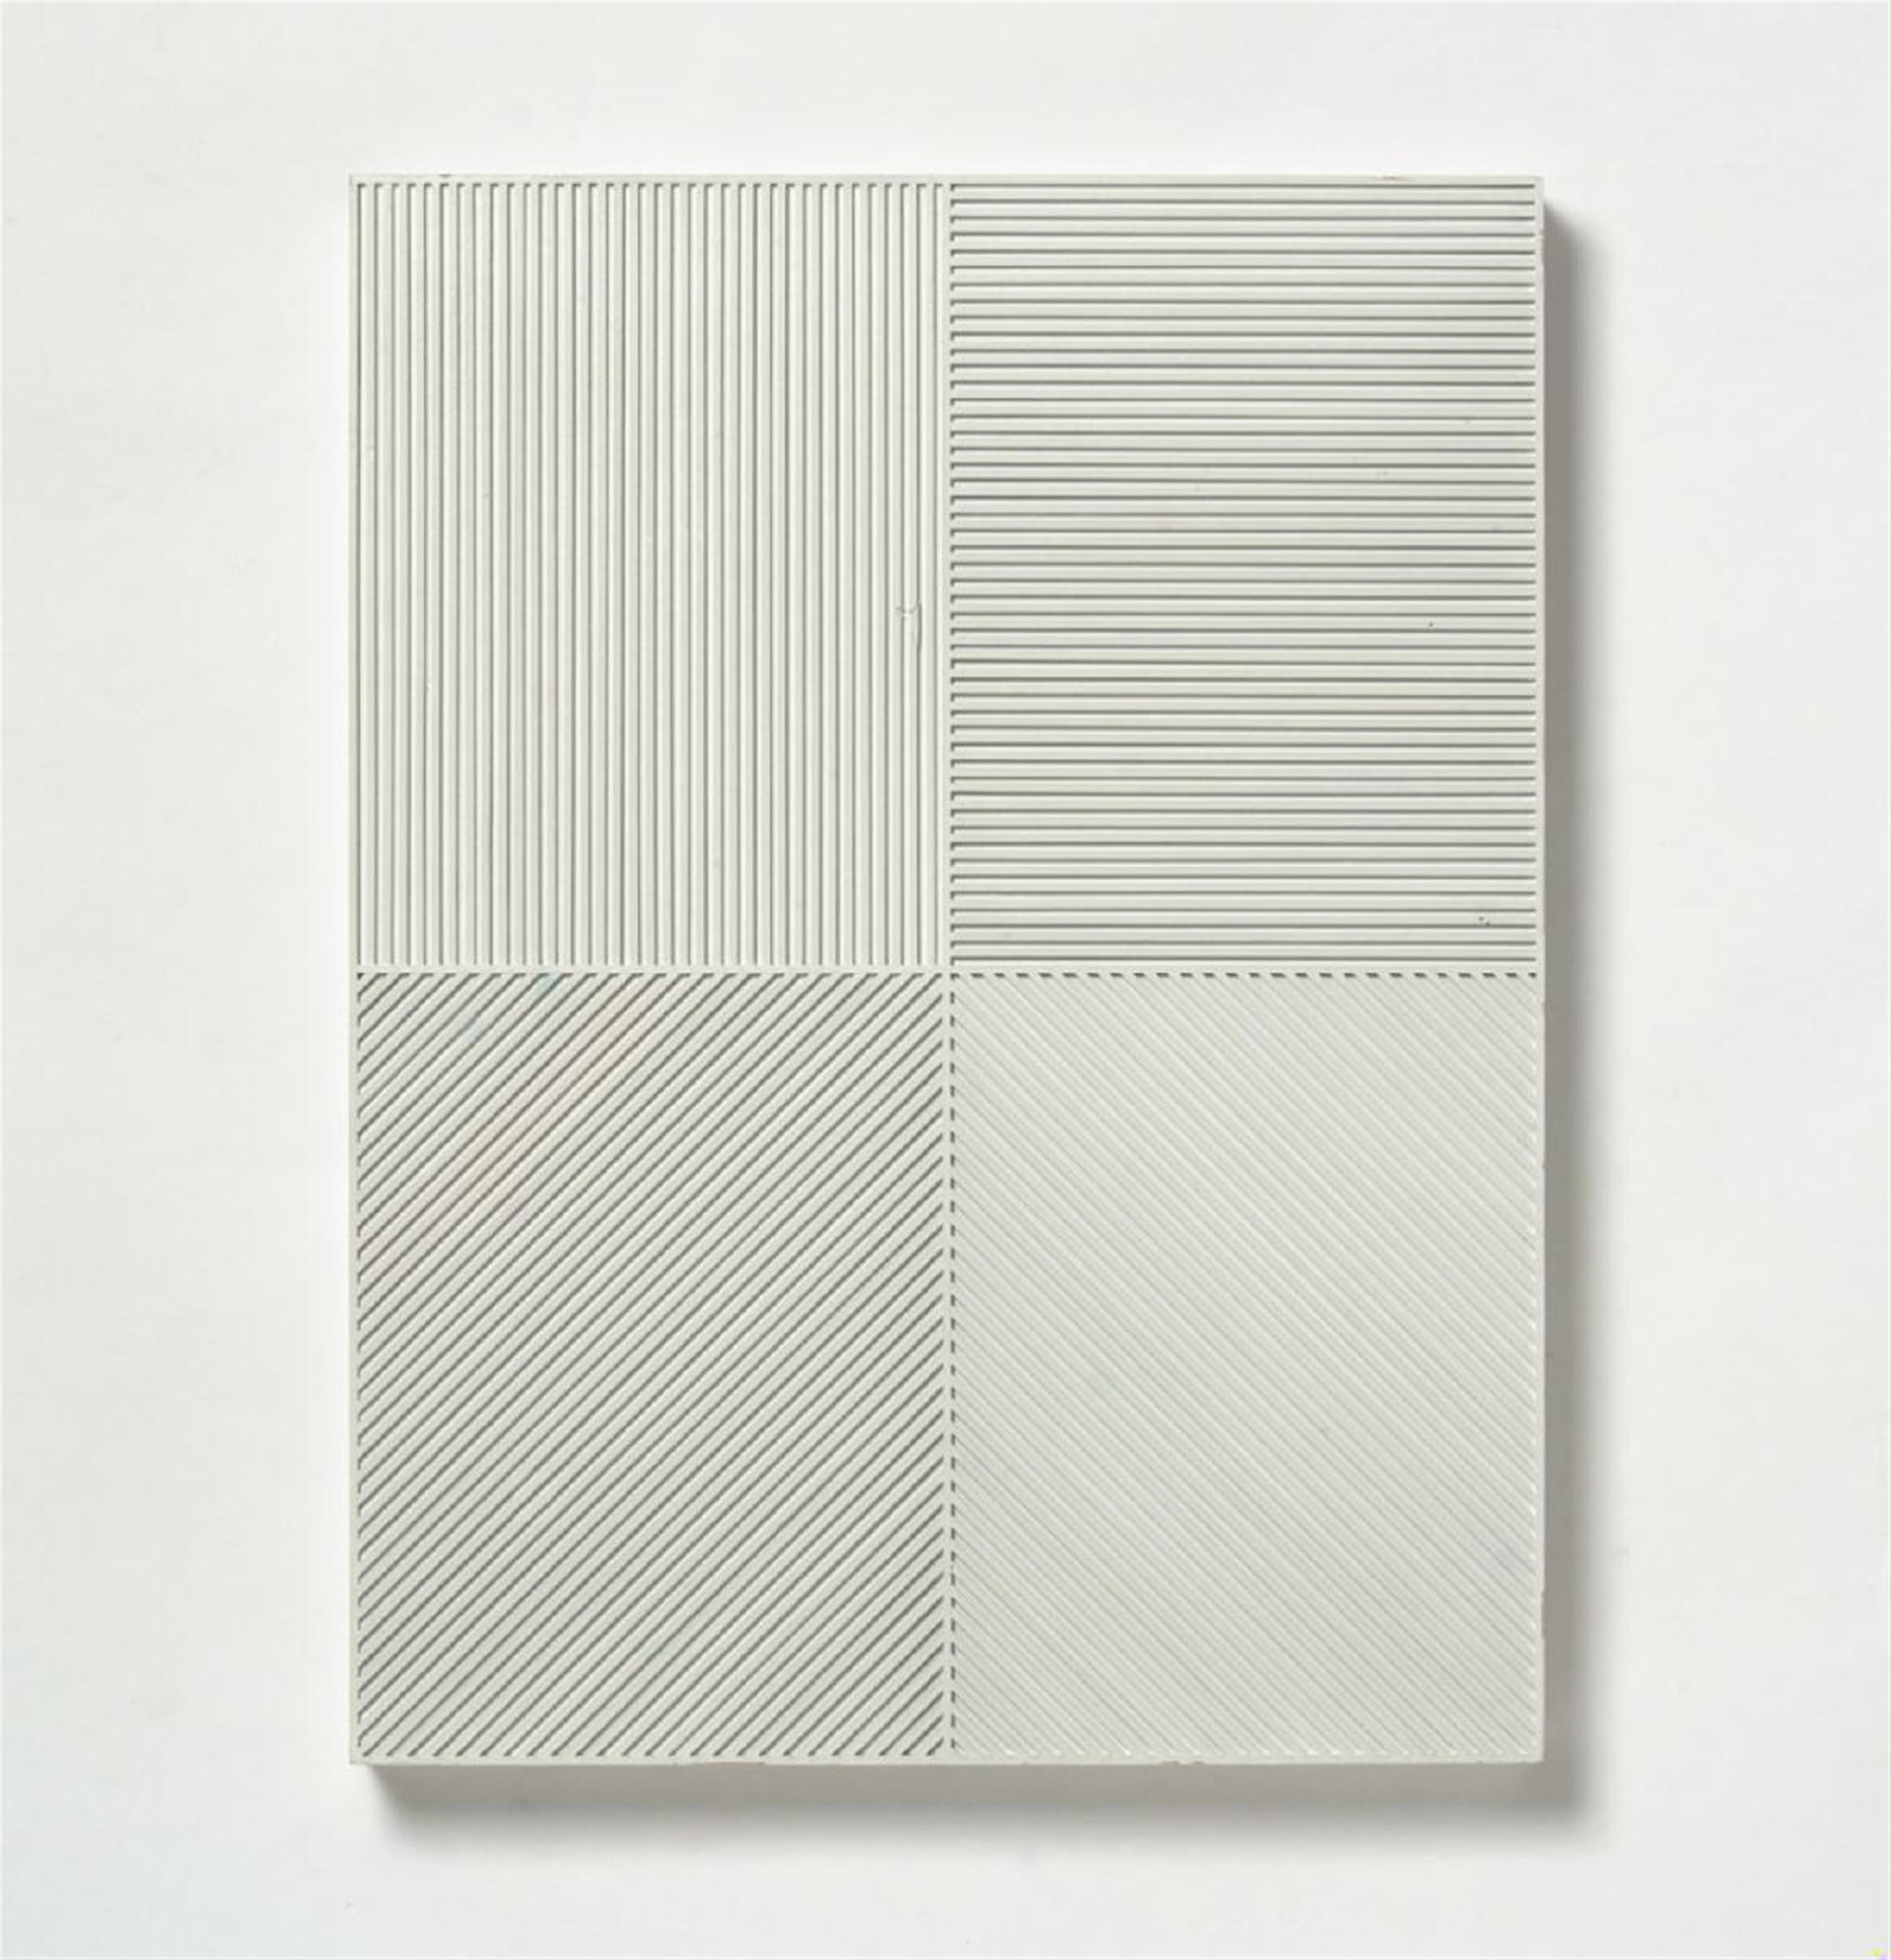 Sol LeWitt - Maquette for Project (Wall Project, Chicago, Illinois) - image-1